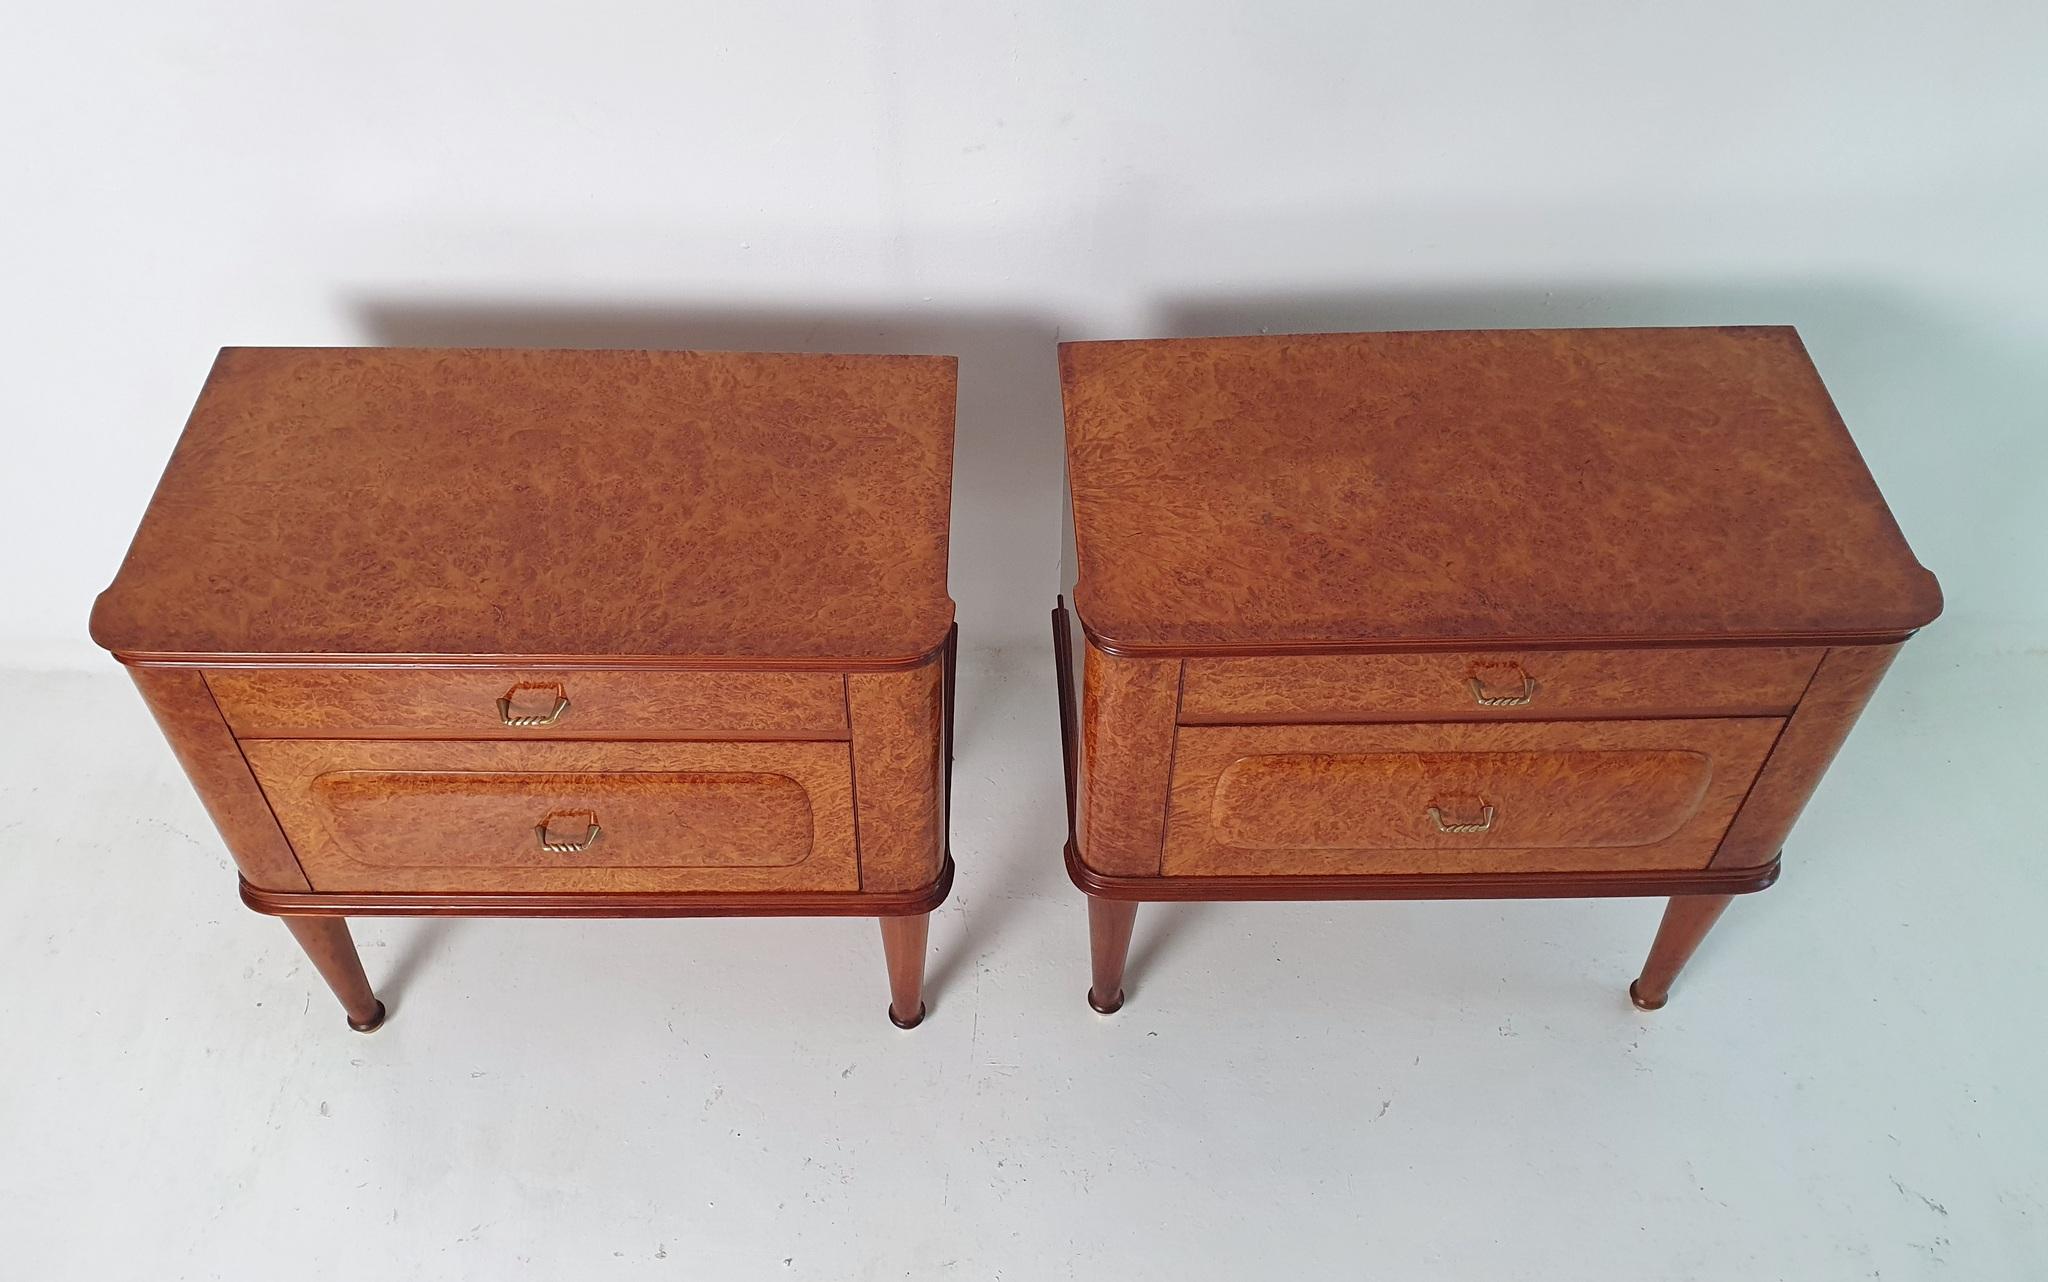 A pair of mid century Italian handmade nightstands made from birch root veneer and details in cherry wood. Each nightstand is equipped with a drawer and a 
small cabinet and adorned with details in brass. In excellent restored condition and very